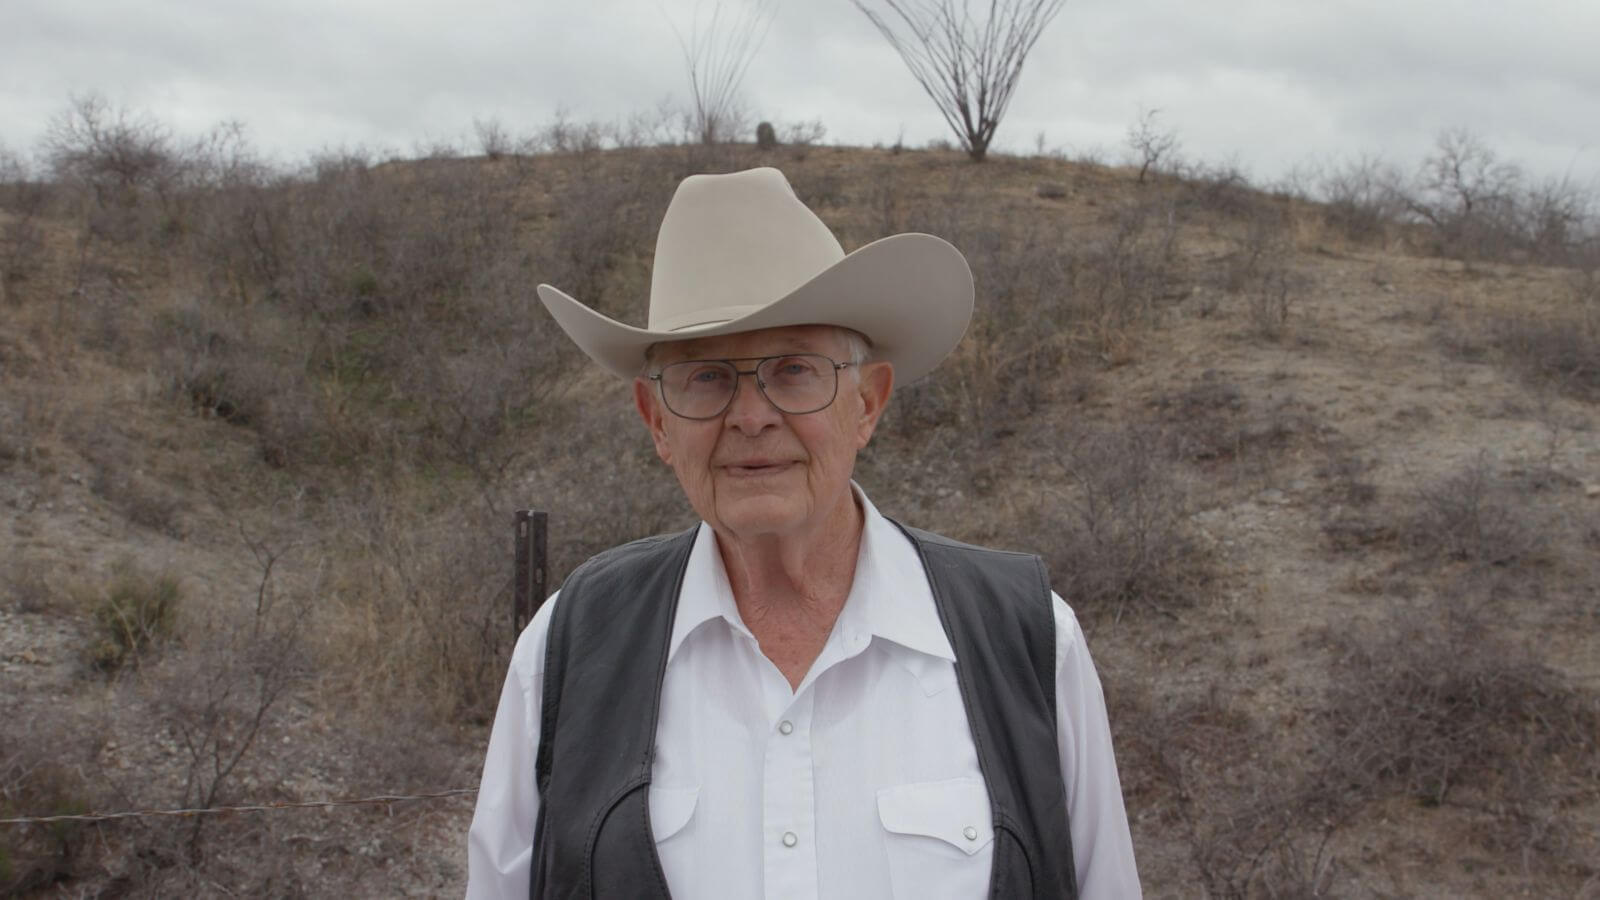 Old man in a white shirt, black vest and tan cowboy hat outside in a plains/desert area